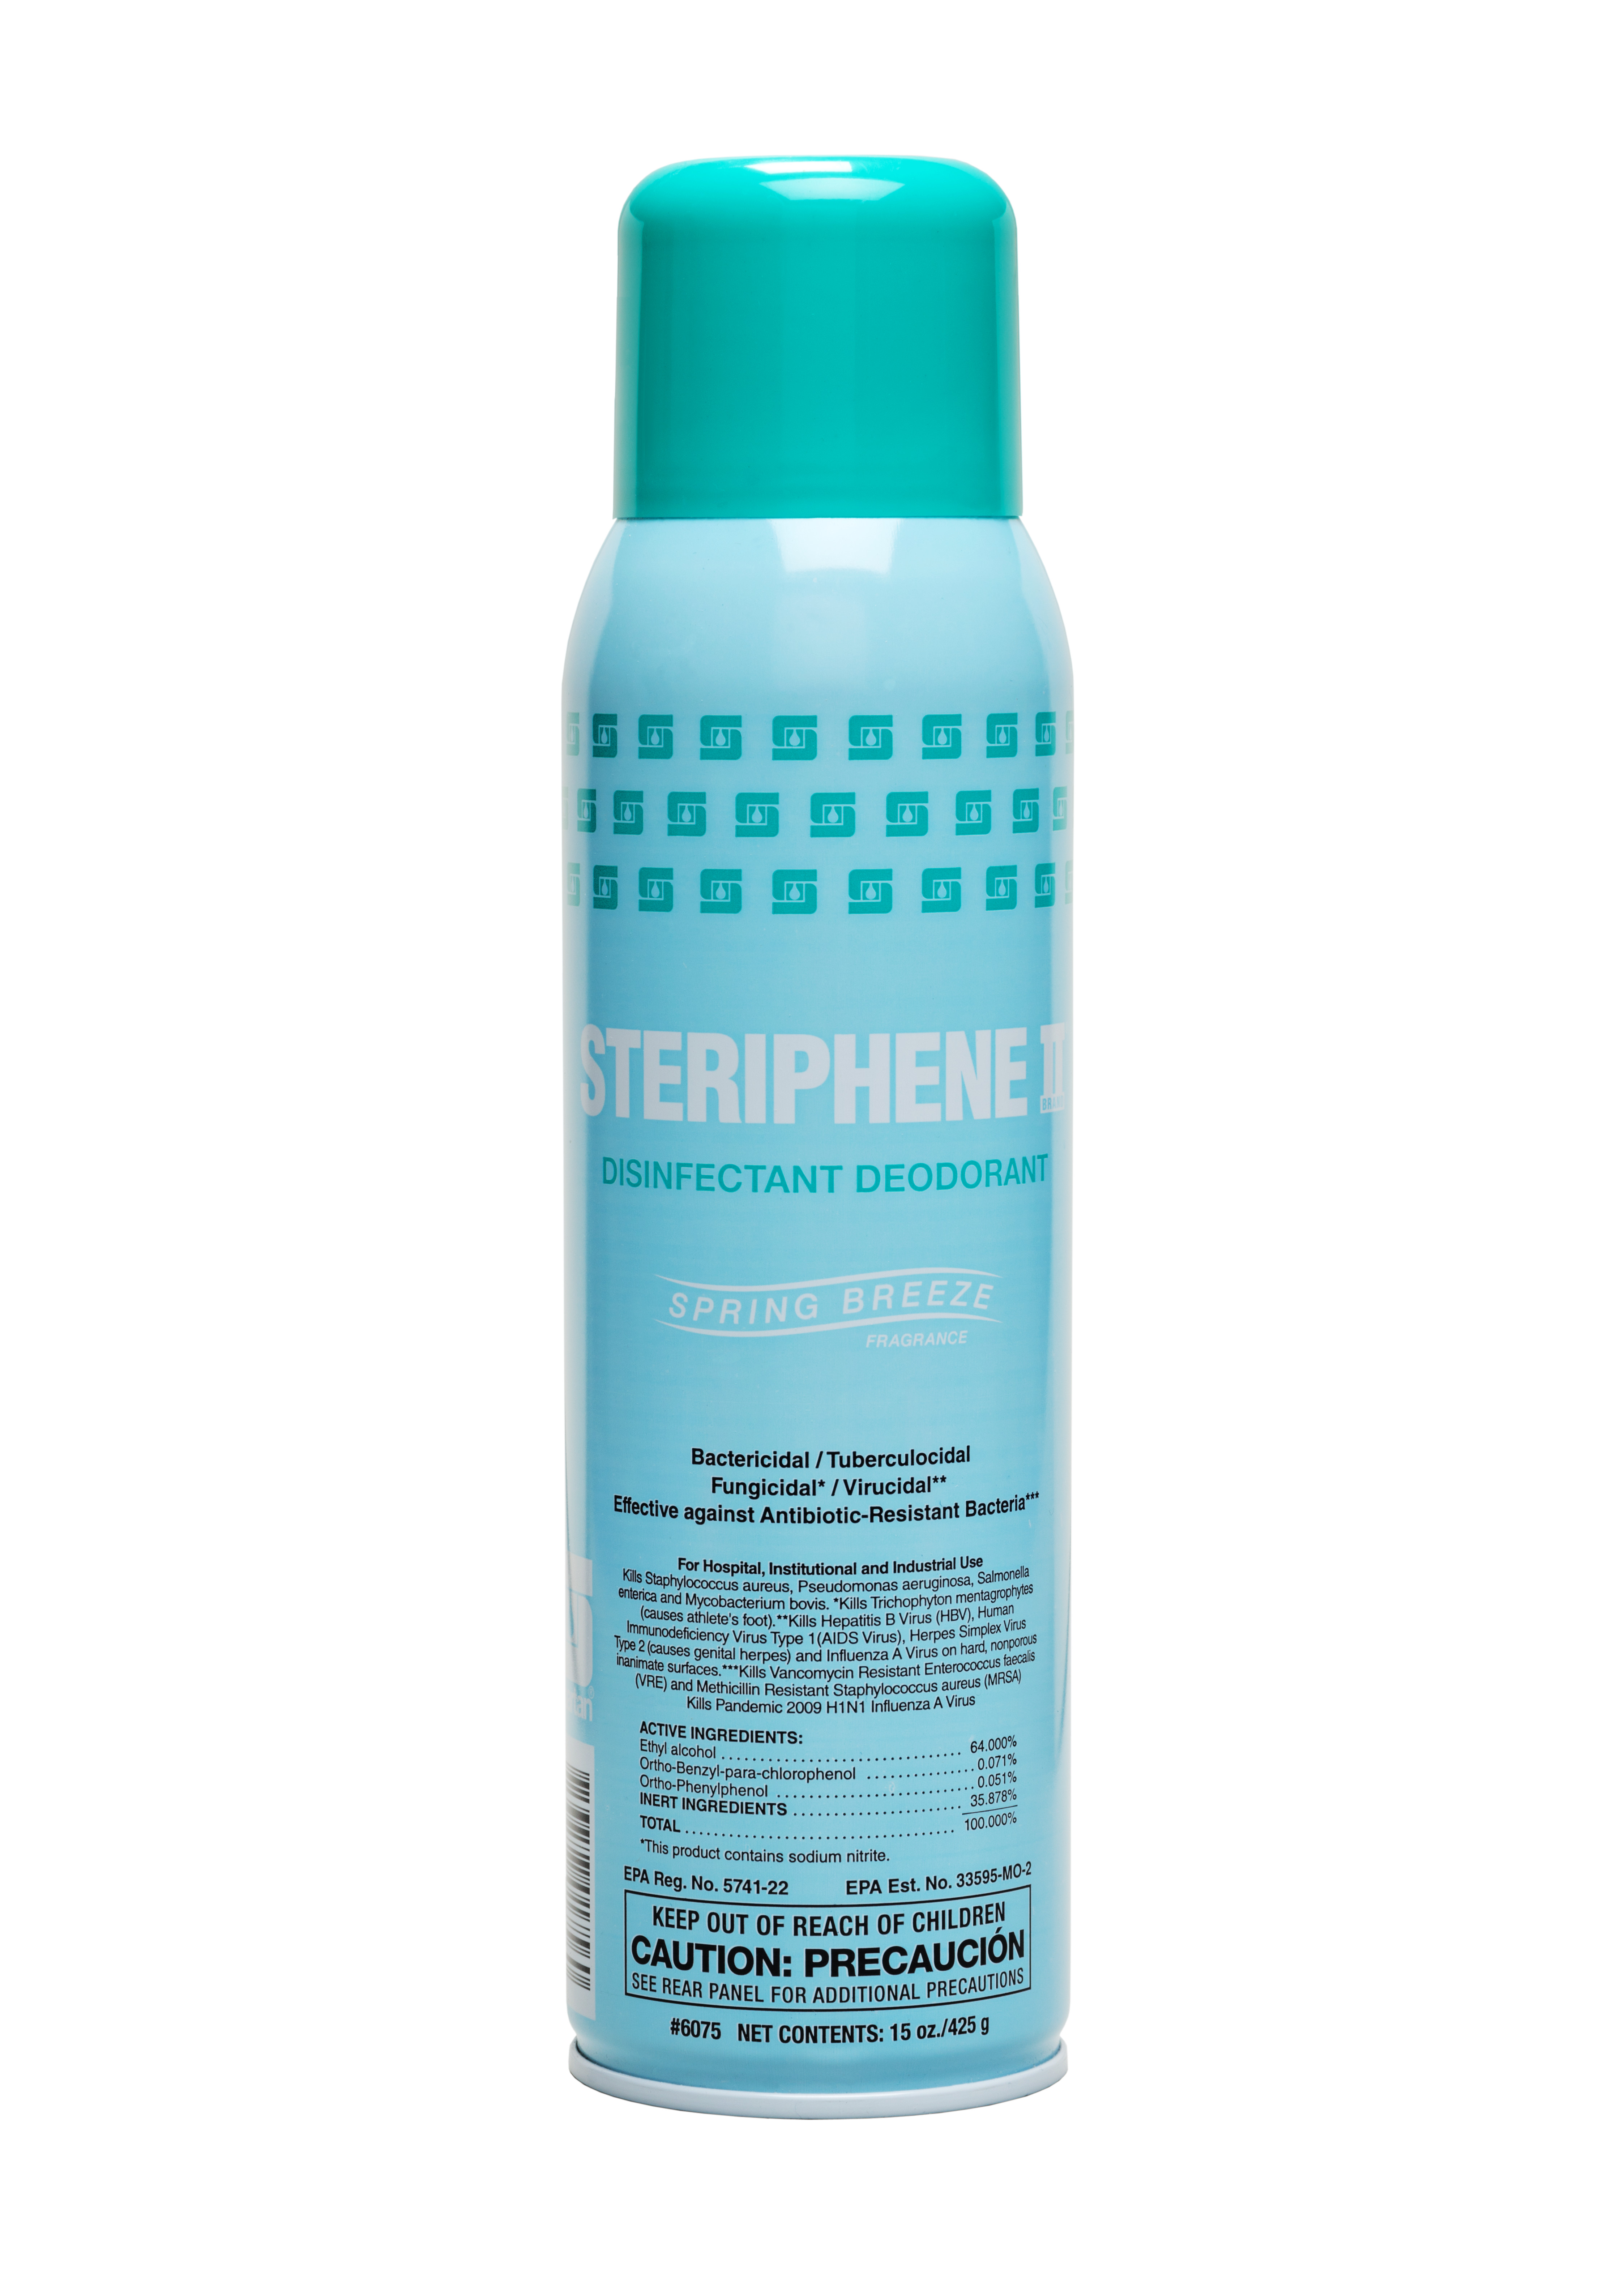 Spartan Chemical Company Steriphene II Brand Disinfectant Deodorant (Spring Breeze Fragrance), 12-20 OZ.CAN